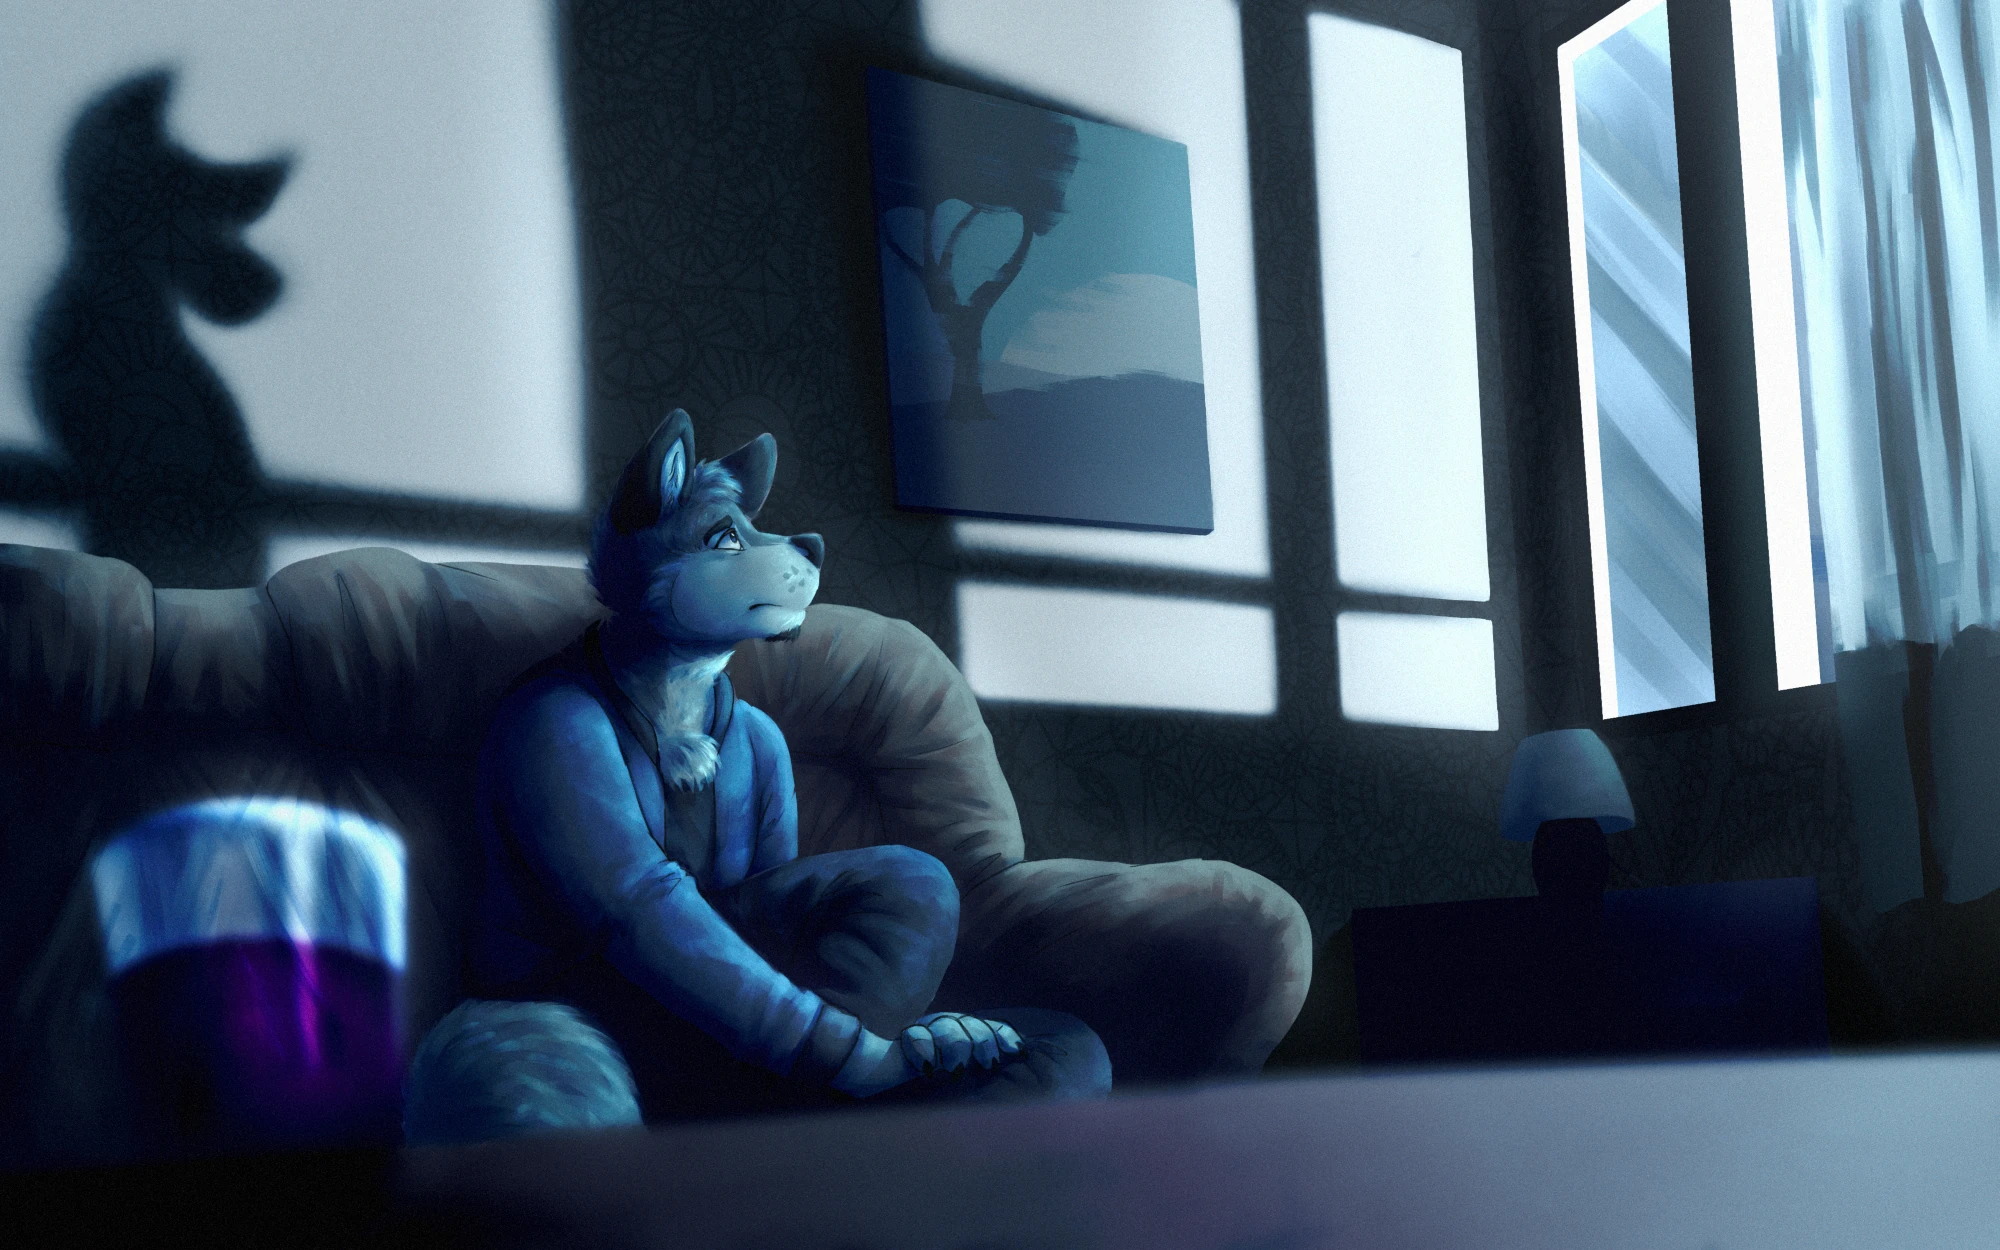 An illustration with a melancholic atmosphere. A canine sits on a couch, with a distorted shadow behind them. It is nighttime; light is shining through the window.